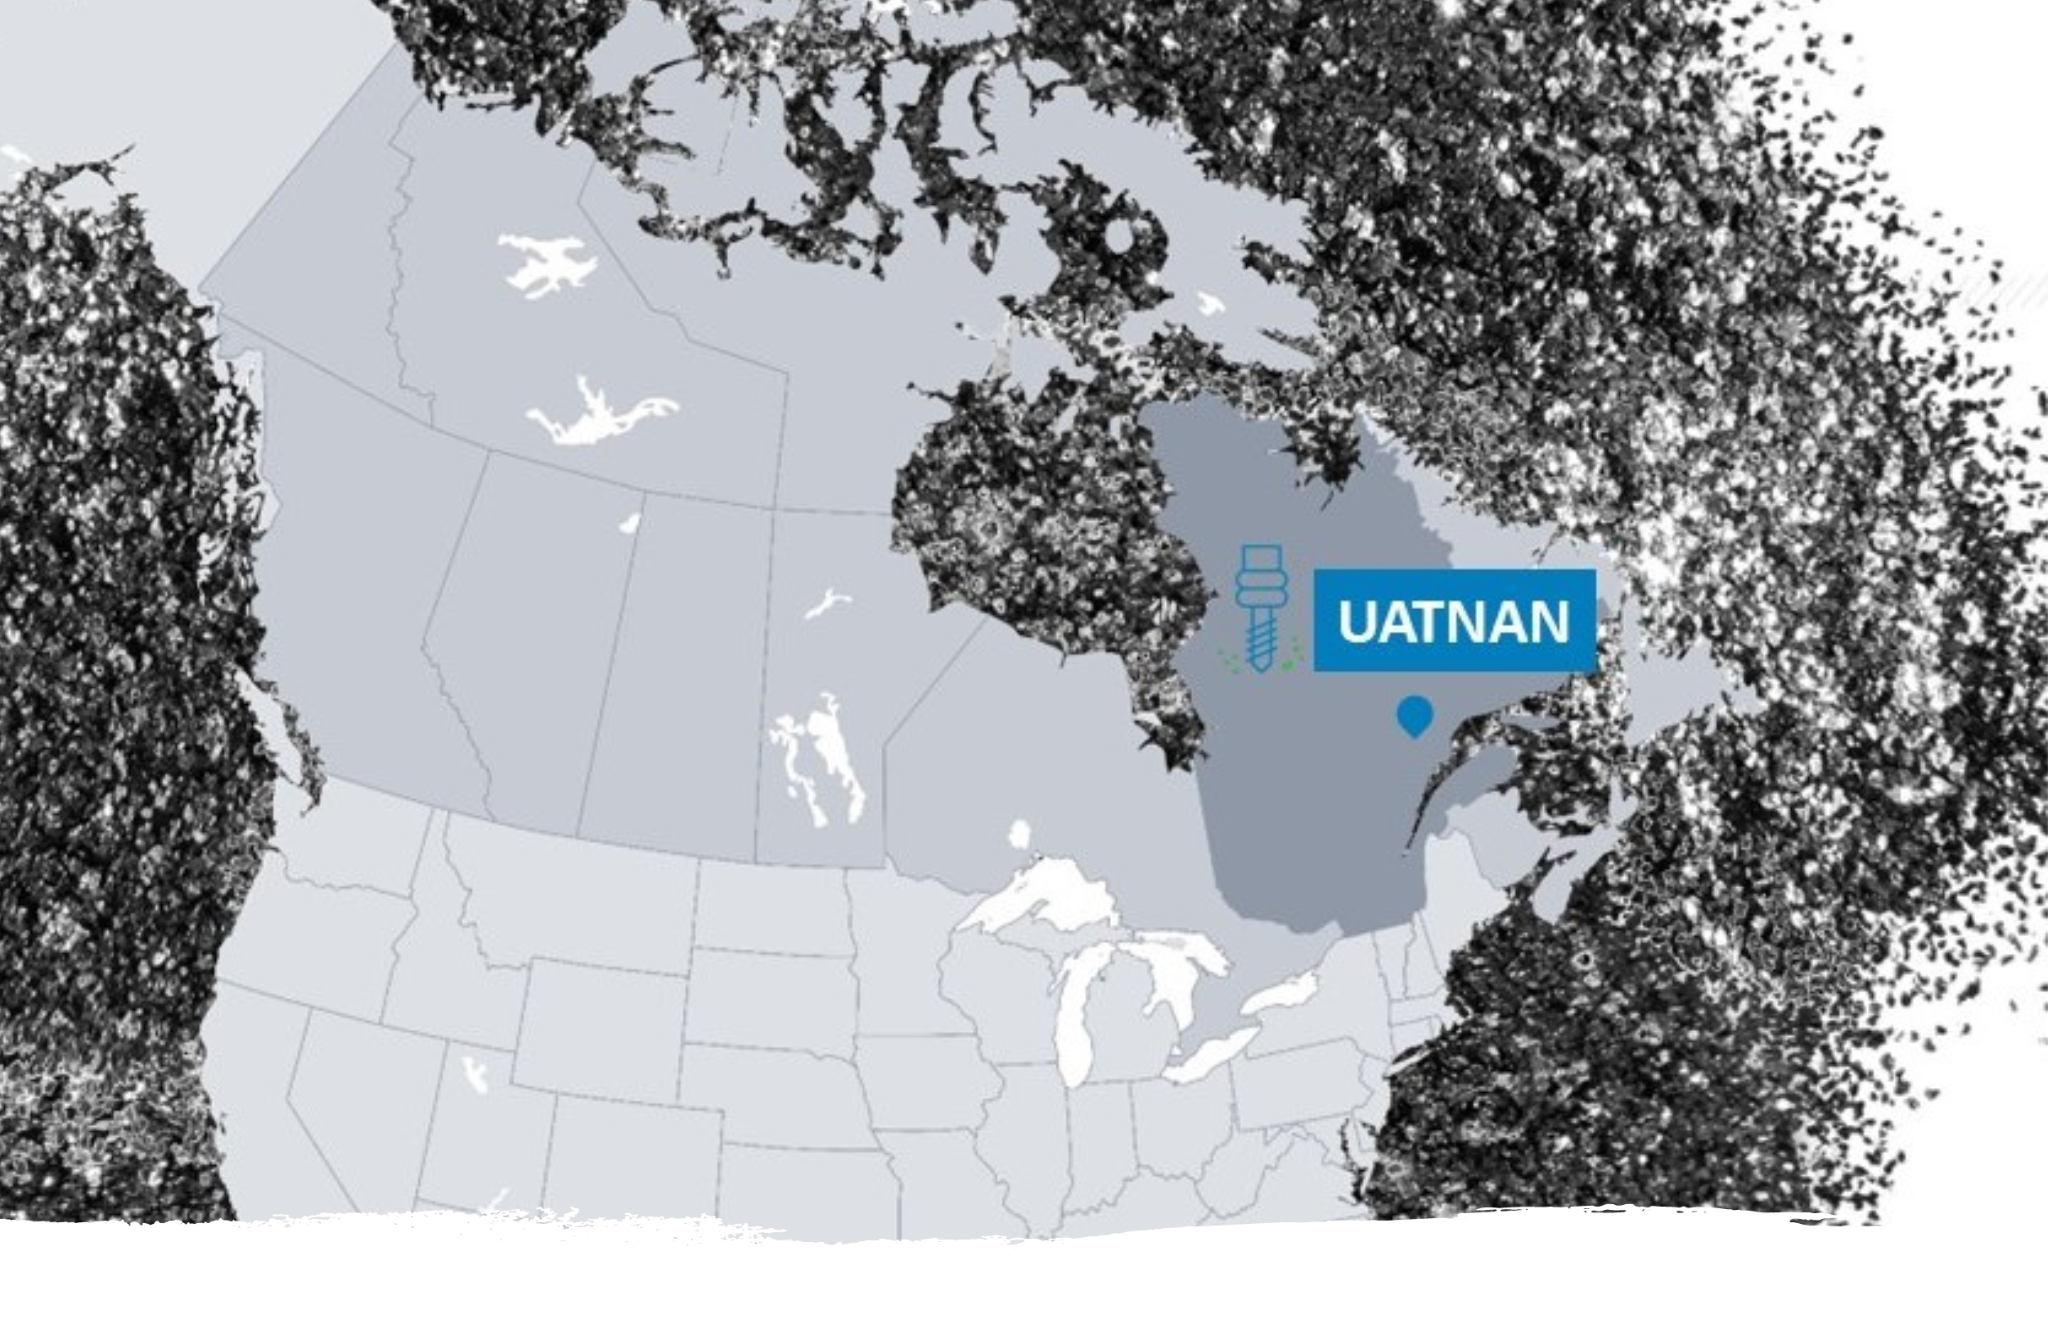 The Uatnan mining project on the Quebec map